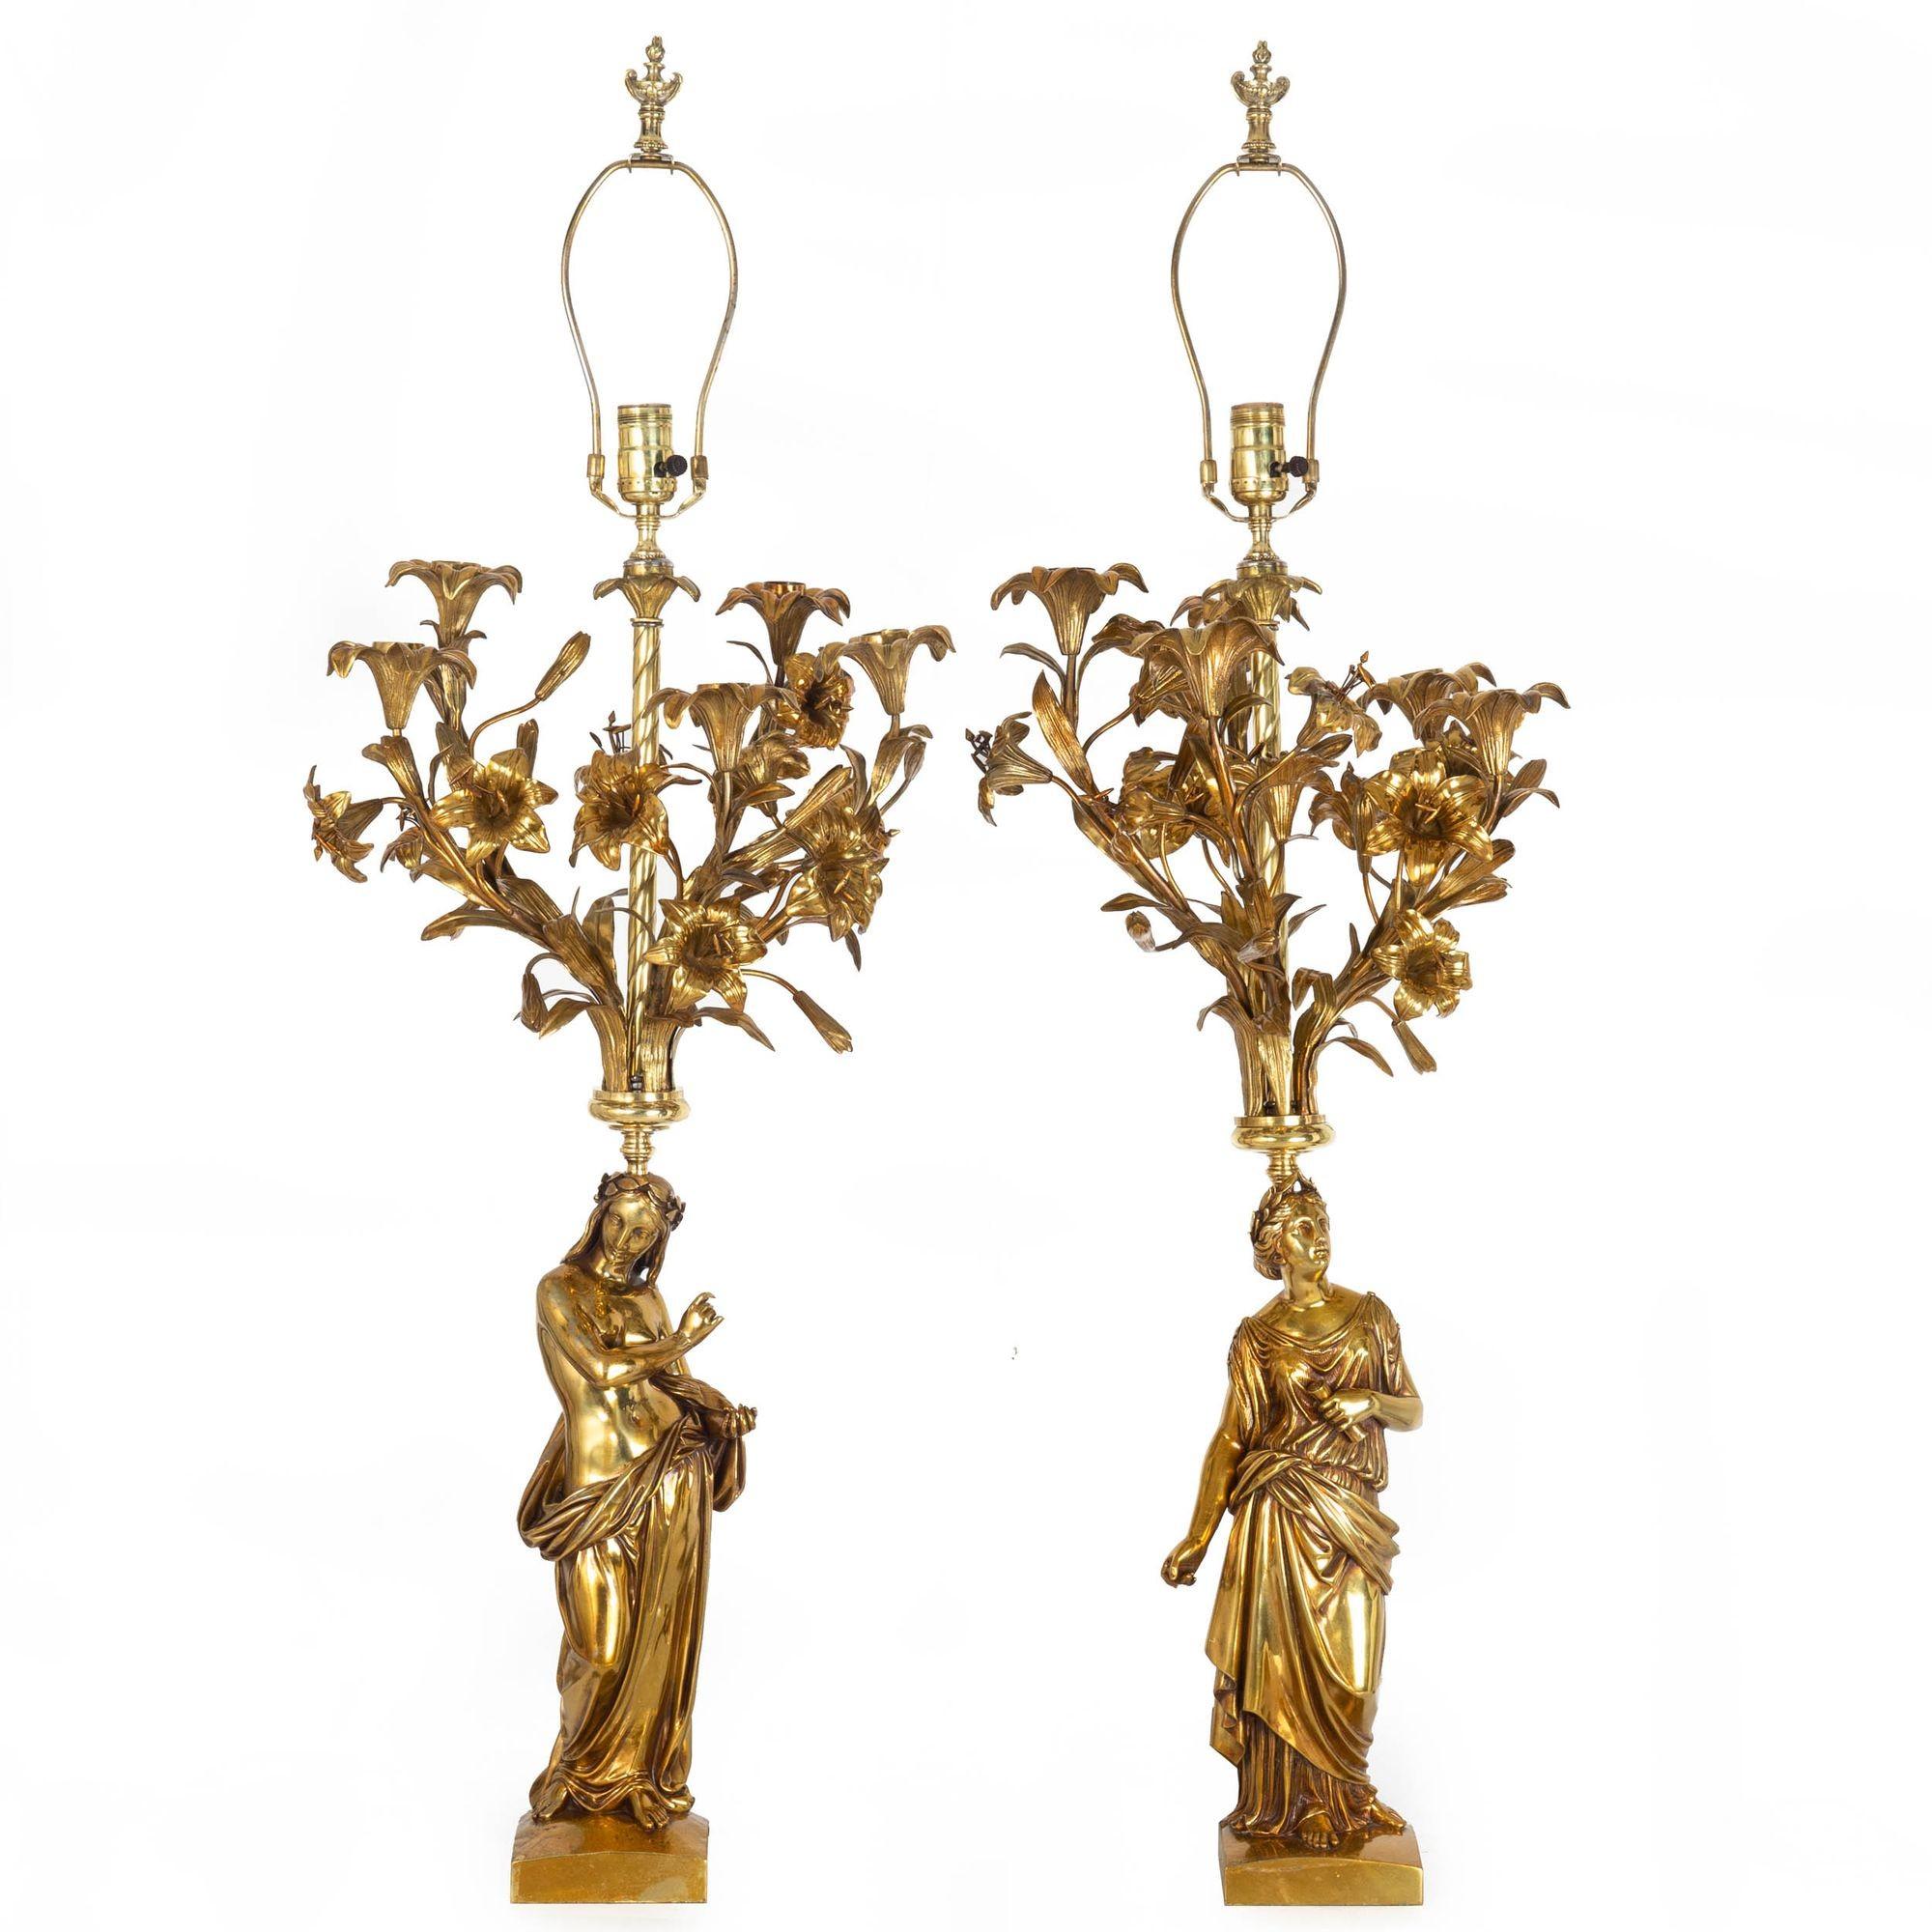 PAIR OF LACQUERED BRONZE 5-LIGHT FIGURAL CANDELABRA FEATURING THE MUSICIAN AND THE POET
After Jean-Jacques Feuchére and Eugene de Labroue  each signed on the base 